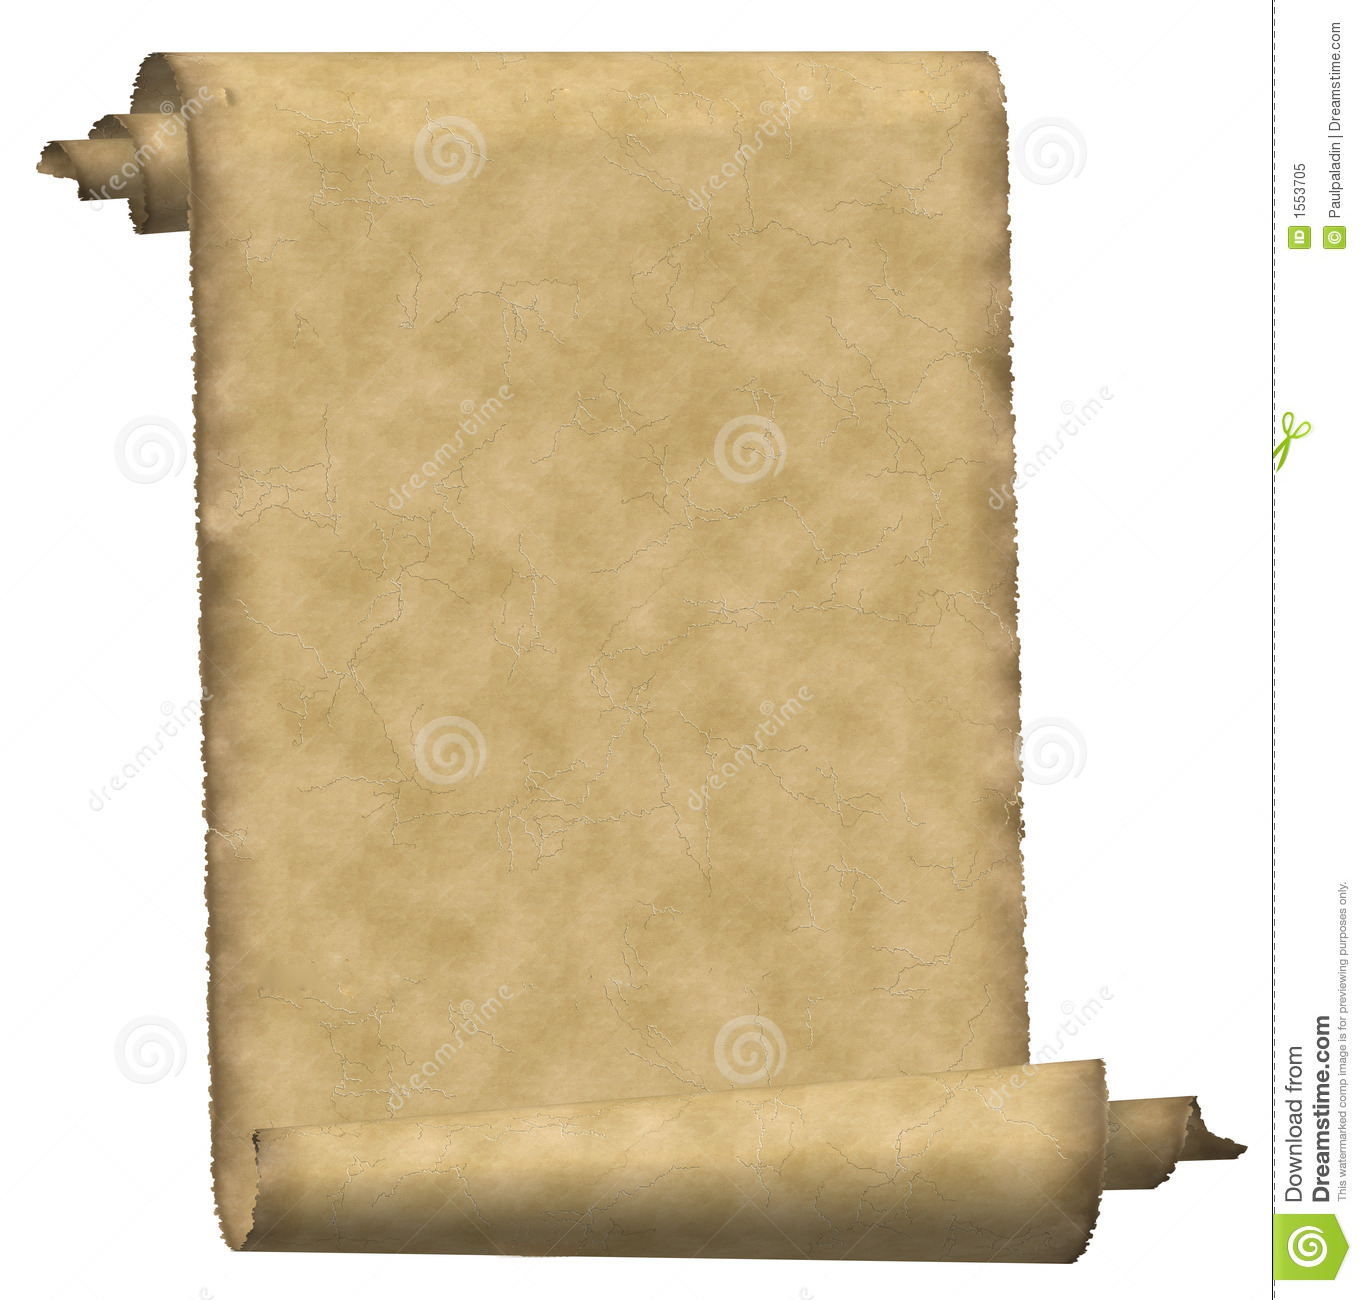 Vintage Scroll Paper Royalty Free Stock Photo   Image  1553705